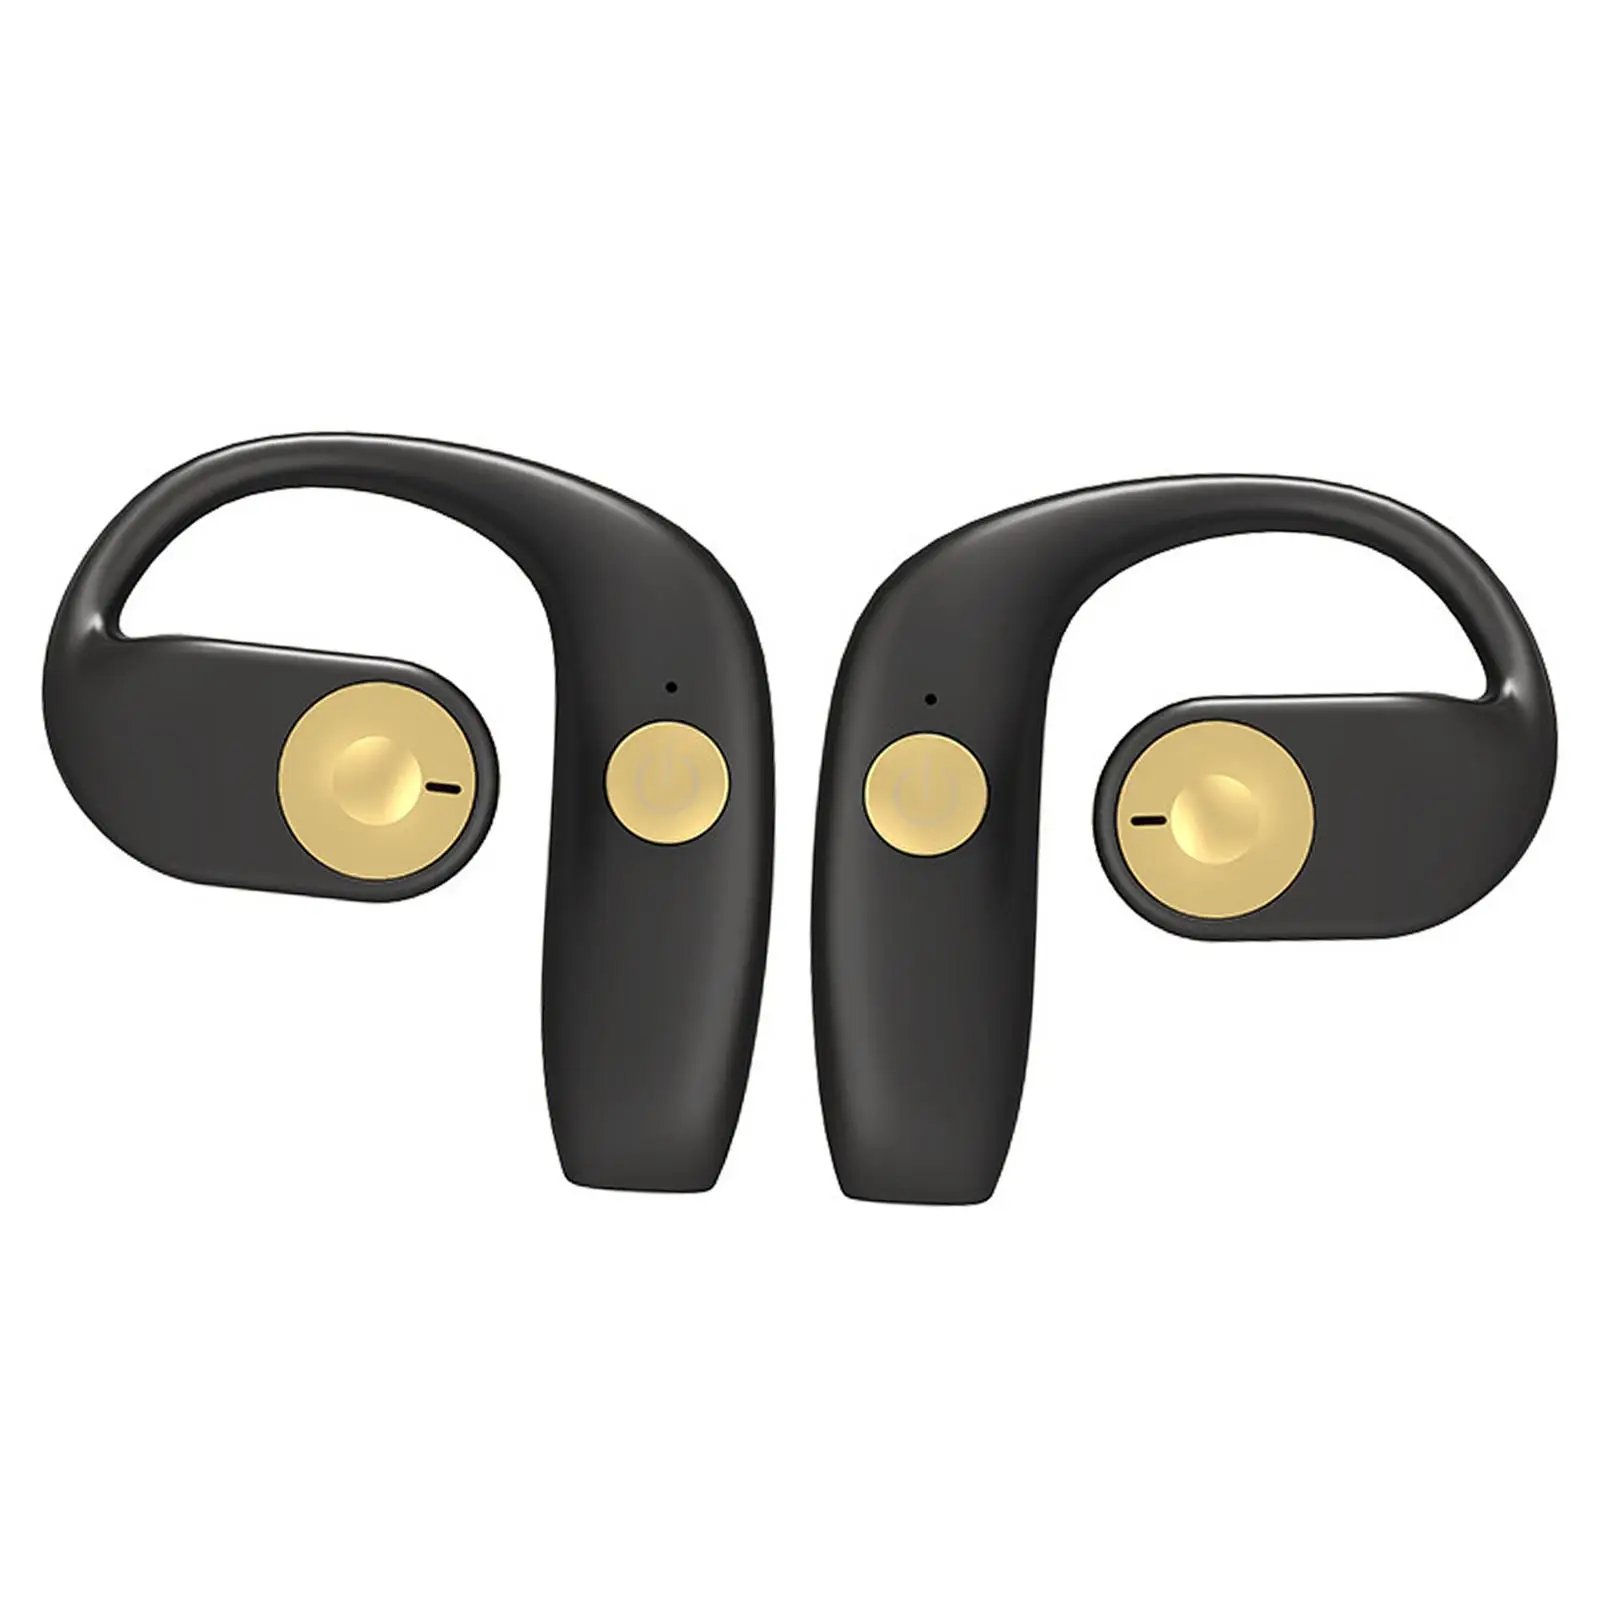 Clip Wireless Headset Ear Hooks Hands Free Noise Cancelling Long Standby Time Open Ear Headphones for Running Business Fitness